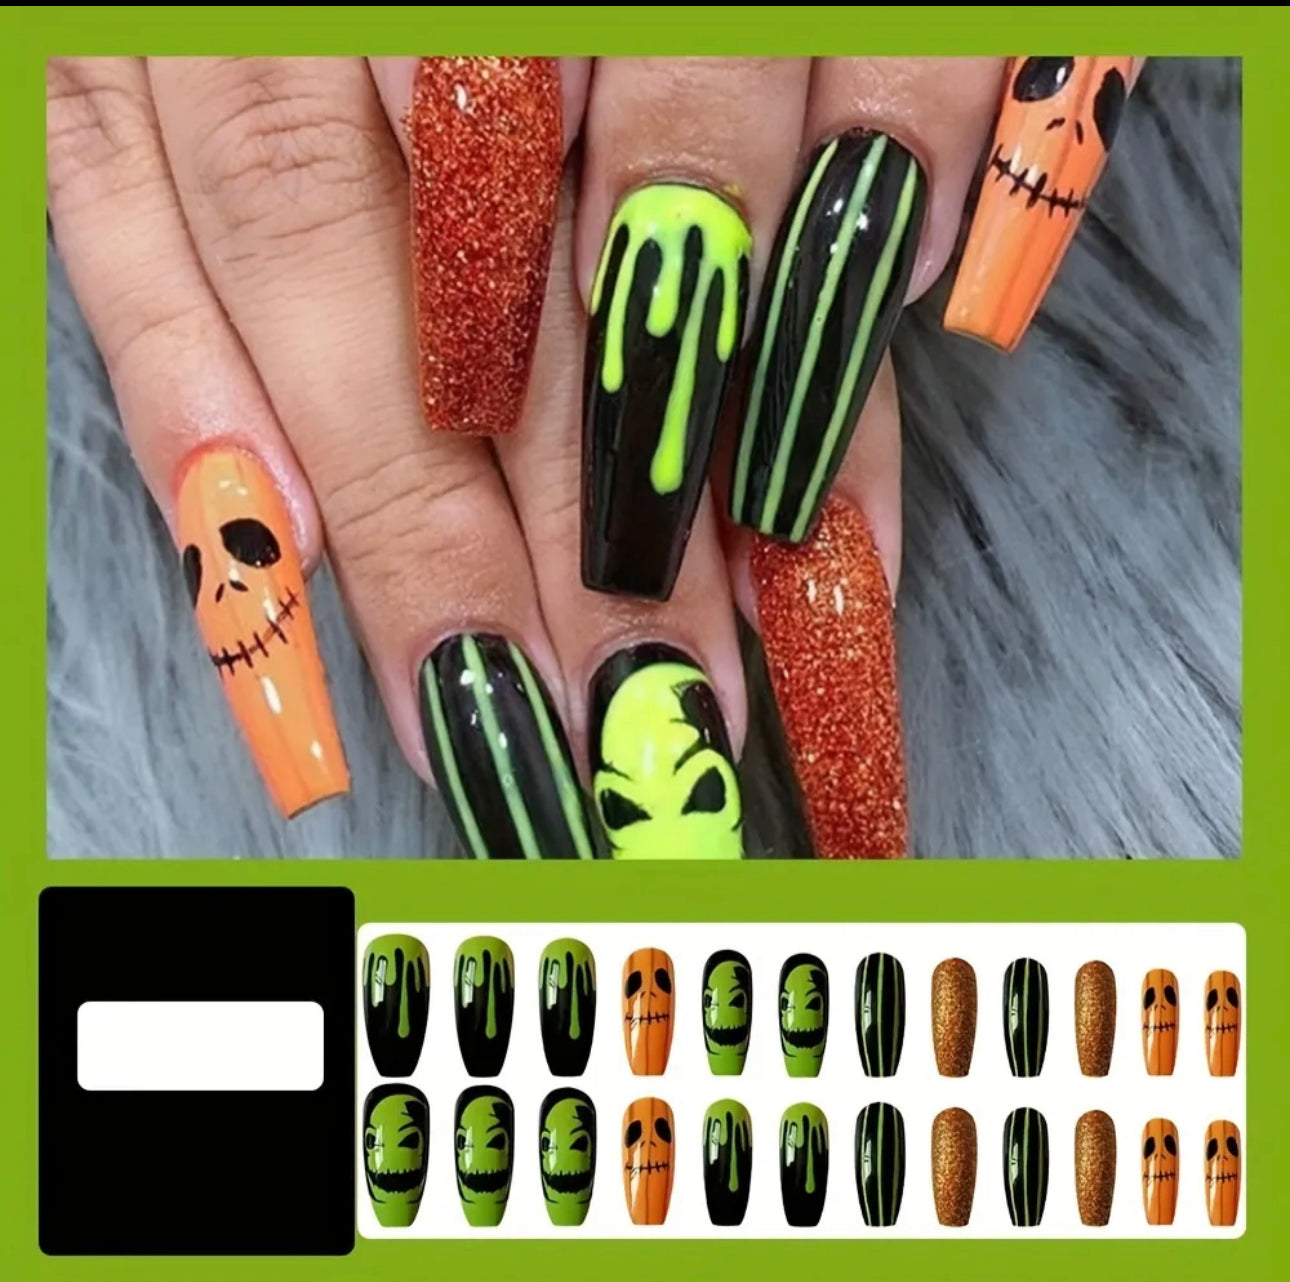 4 Packs (96 Pcs) Press On Nails, Halloween Horror Grimace Blood Drop With Design, Mixed Fake Nails Long Almond/Coffin Glue On Nails Set With Adhesive Tabs Nails File For Women